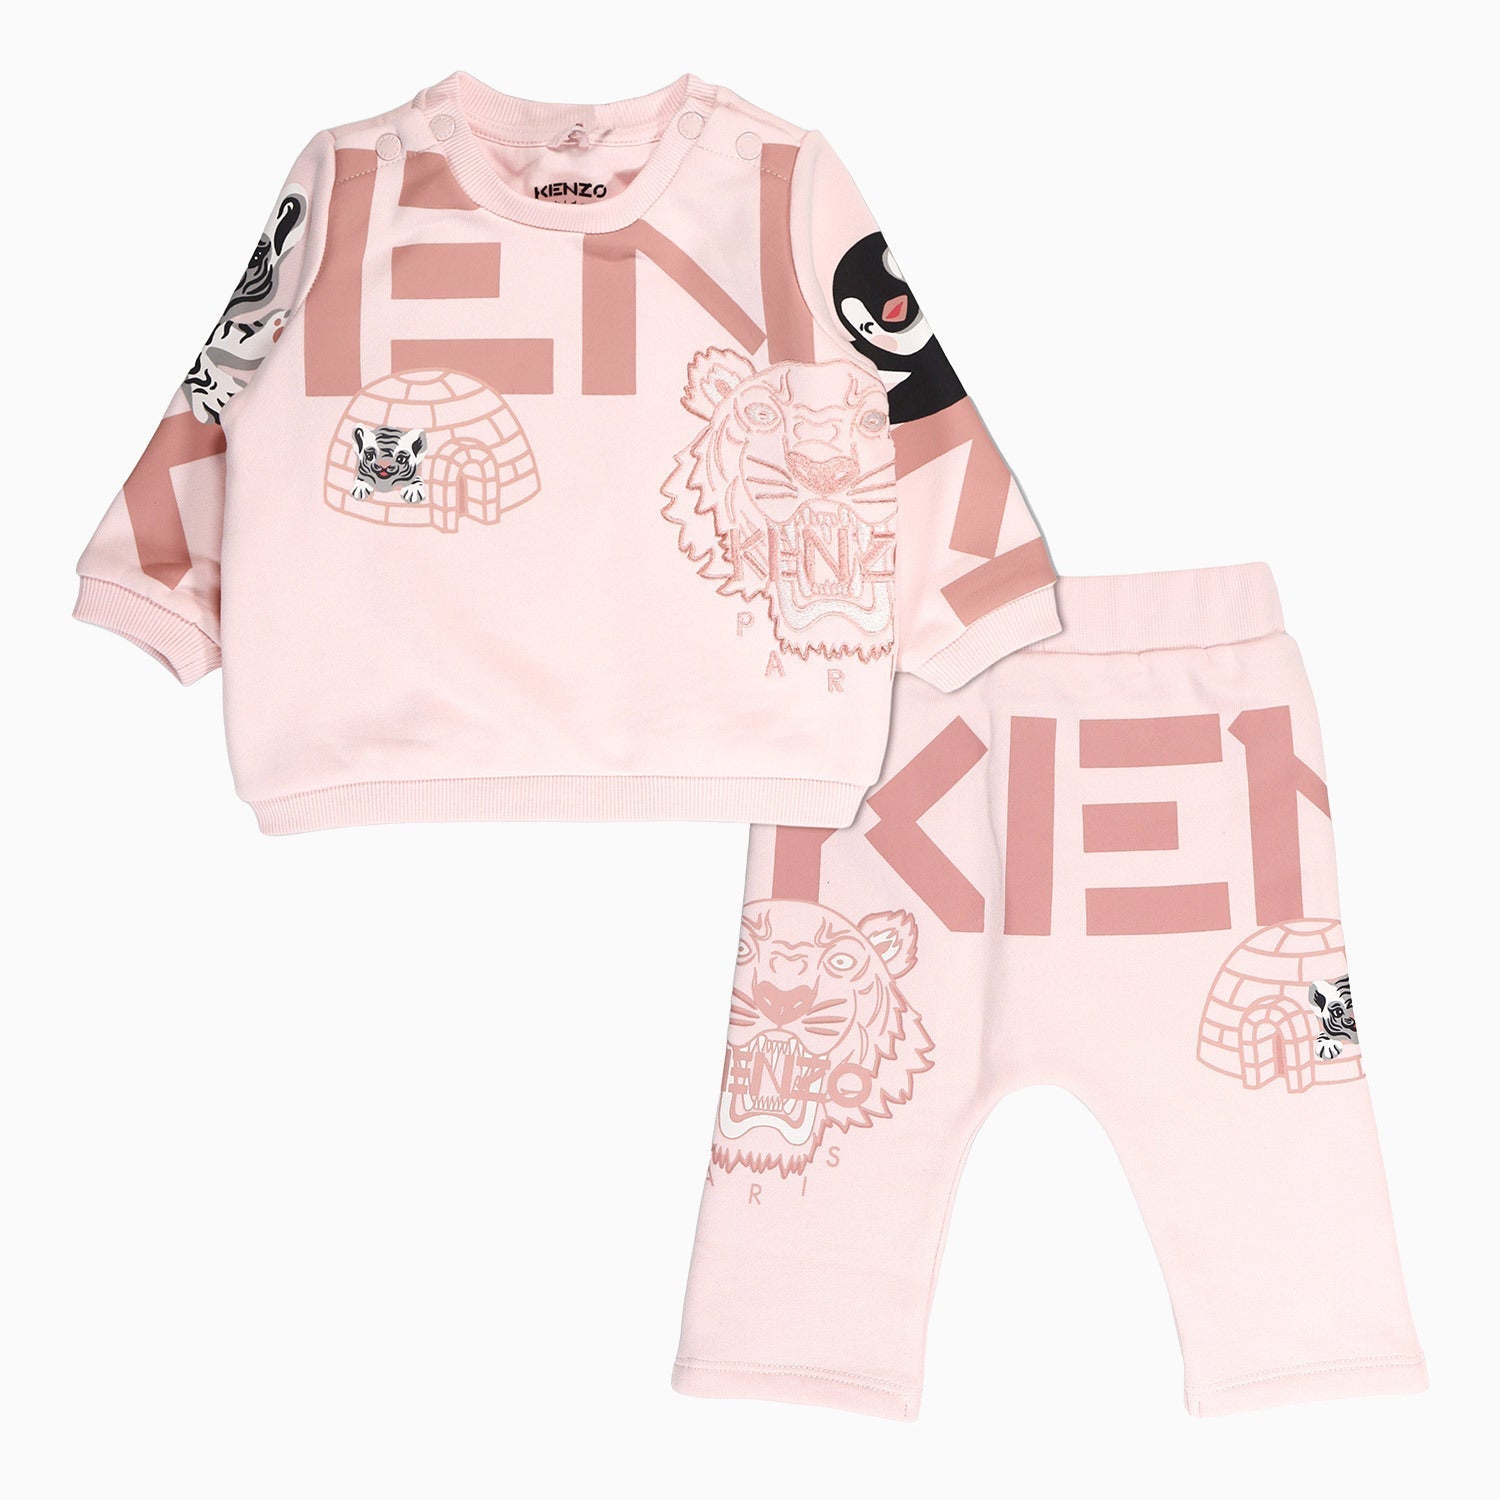 Kenzo Kid's Tiger Print Outfit - Color: Pink Pale - Kids Premium Clothing -